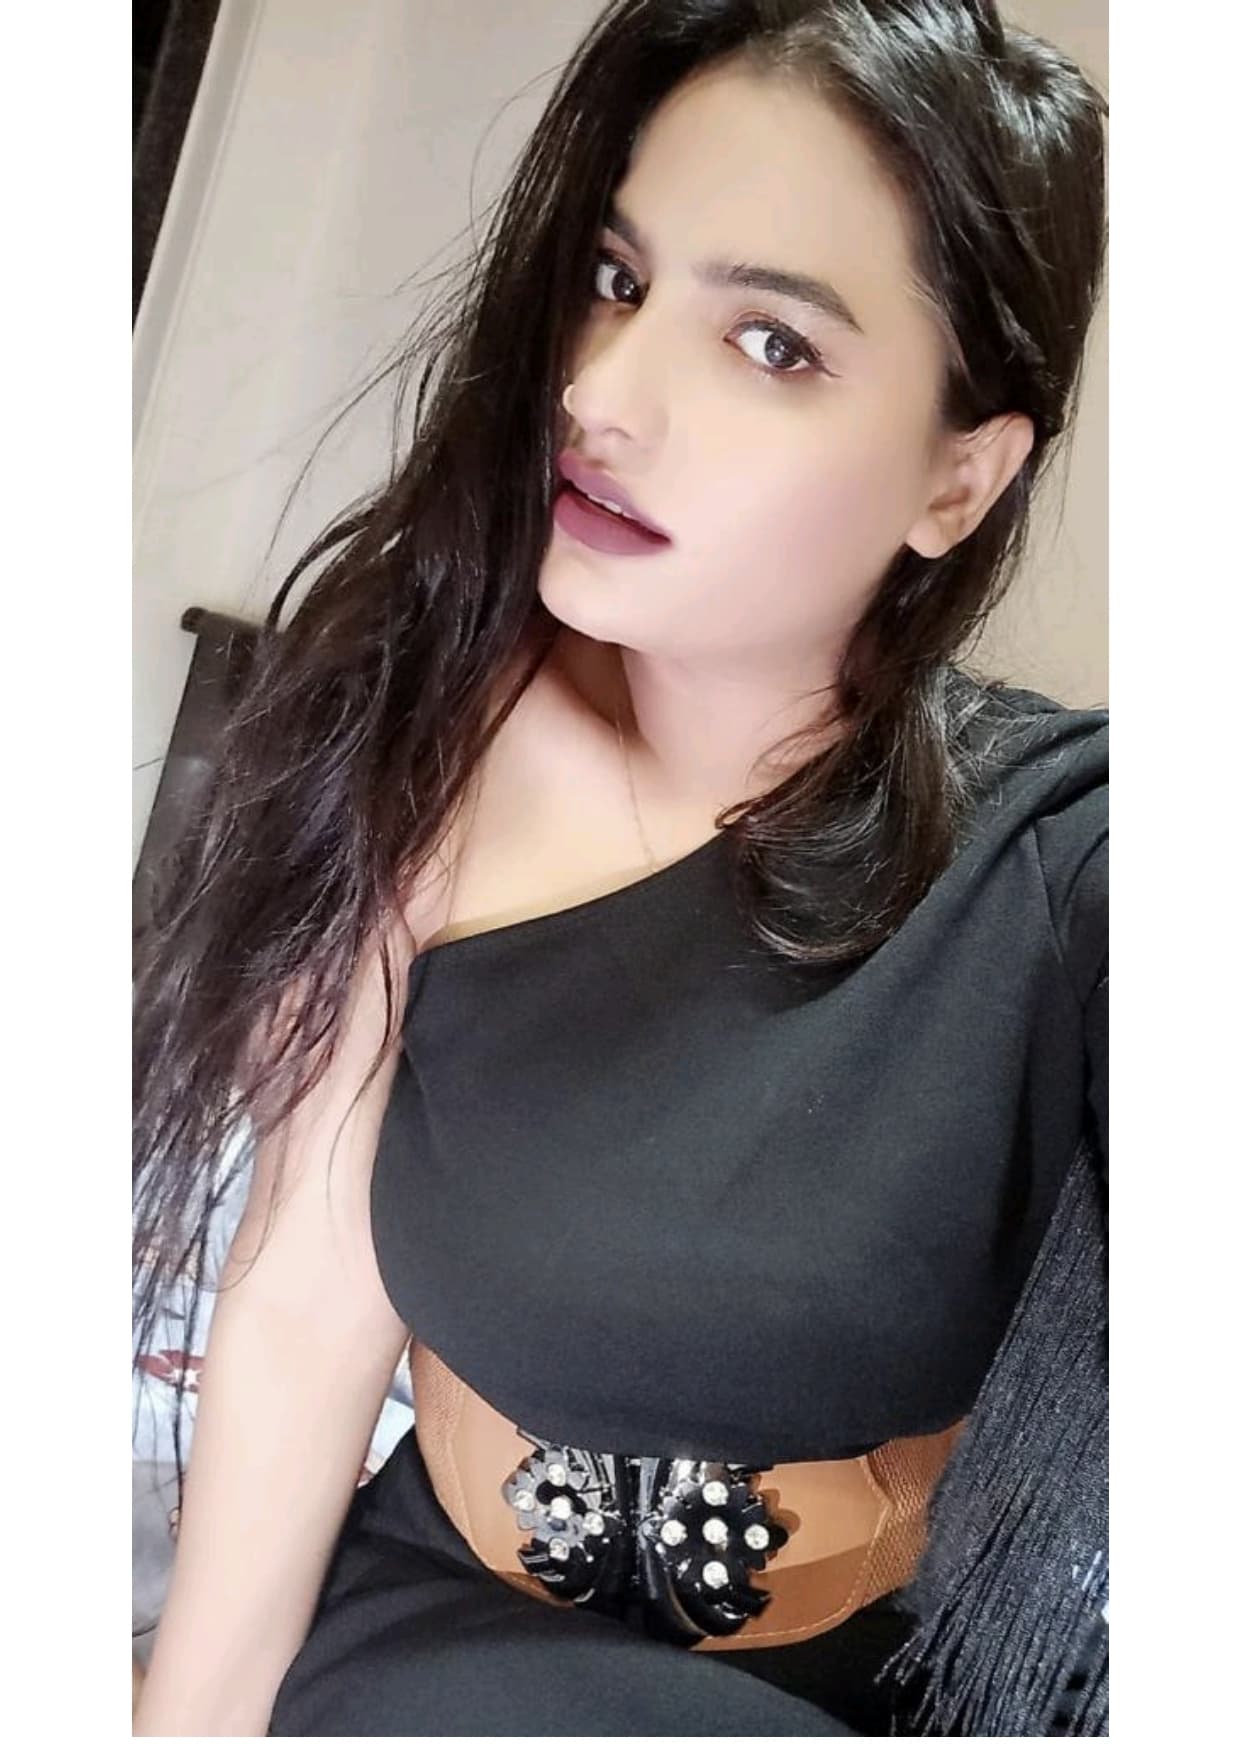 Desi call girls from Ludhiana with Low rate